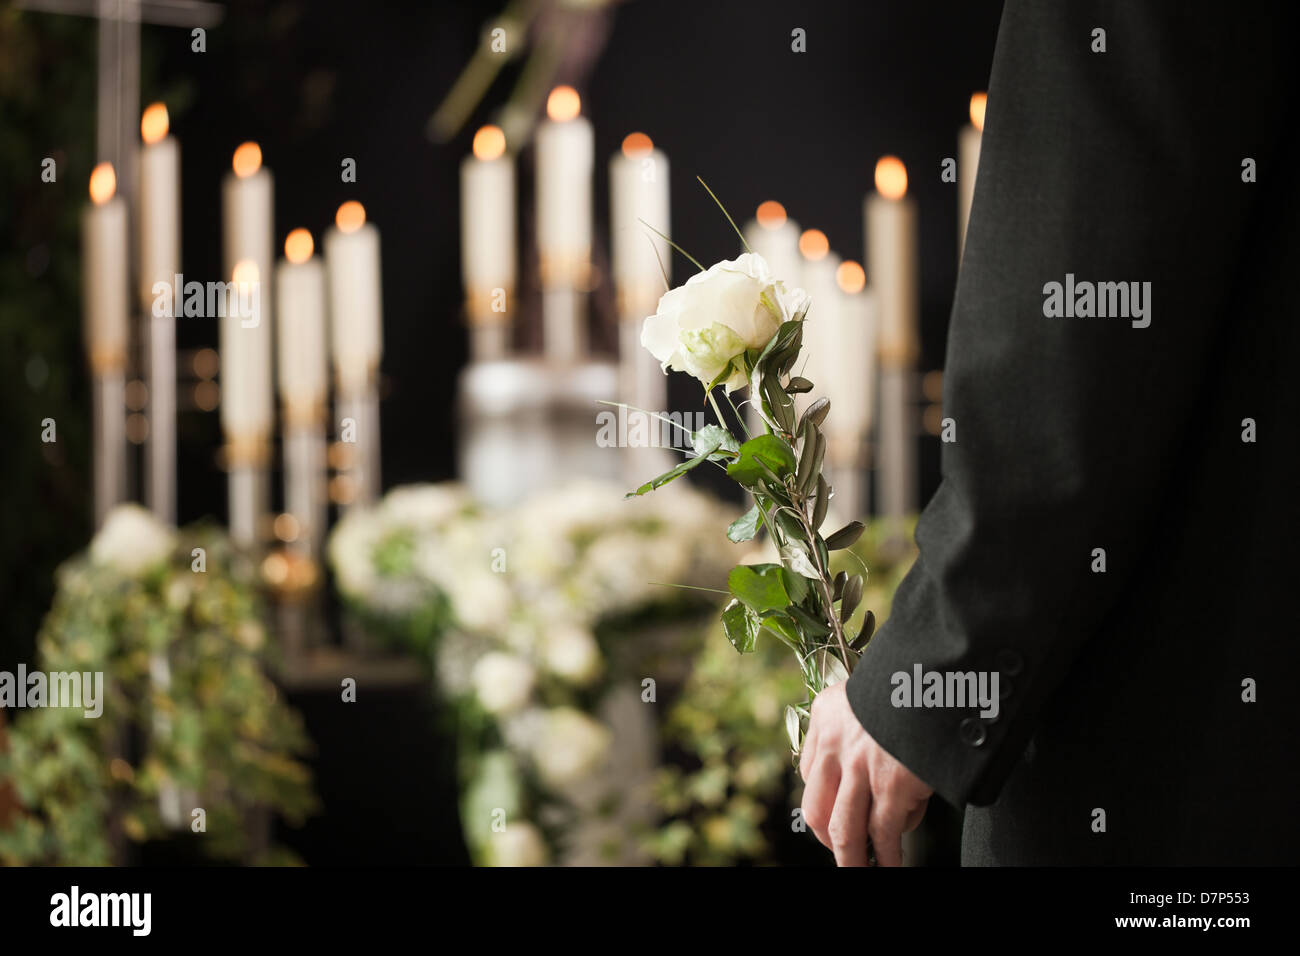 Religion, death and dolor - man at funeral with white rose mourning the dead Stock Photo